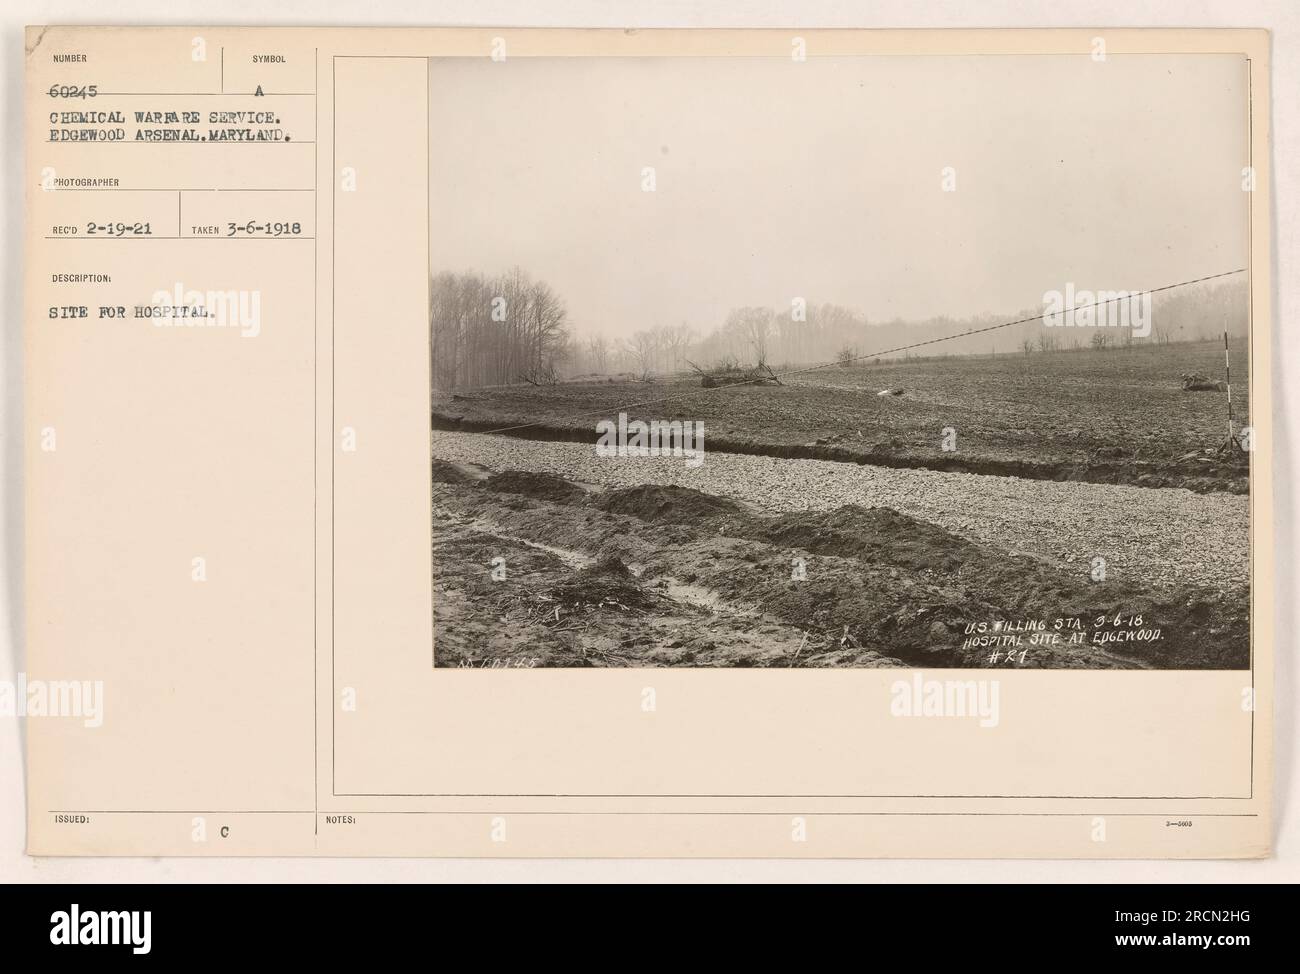 Chemical Warfare Service hospital site at Edgewood Arsenal, Maryland. Photograph taken on March 6, 1918. The hospital with symbol number 60245 was a designated site for treating patients affected by chemical warfare during World War I. Additional notes mention Selings 3, Filling 3TA, and plans for the hospital site at Edgewood. Stock Photo